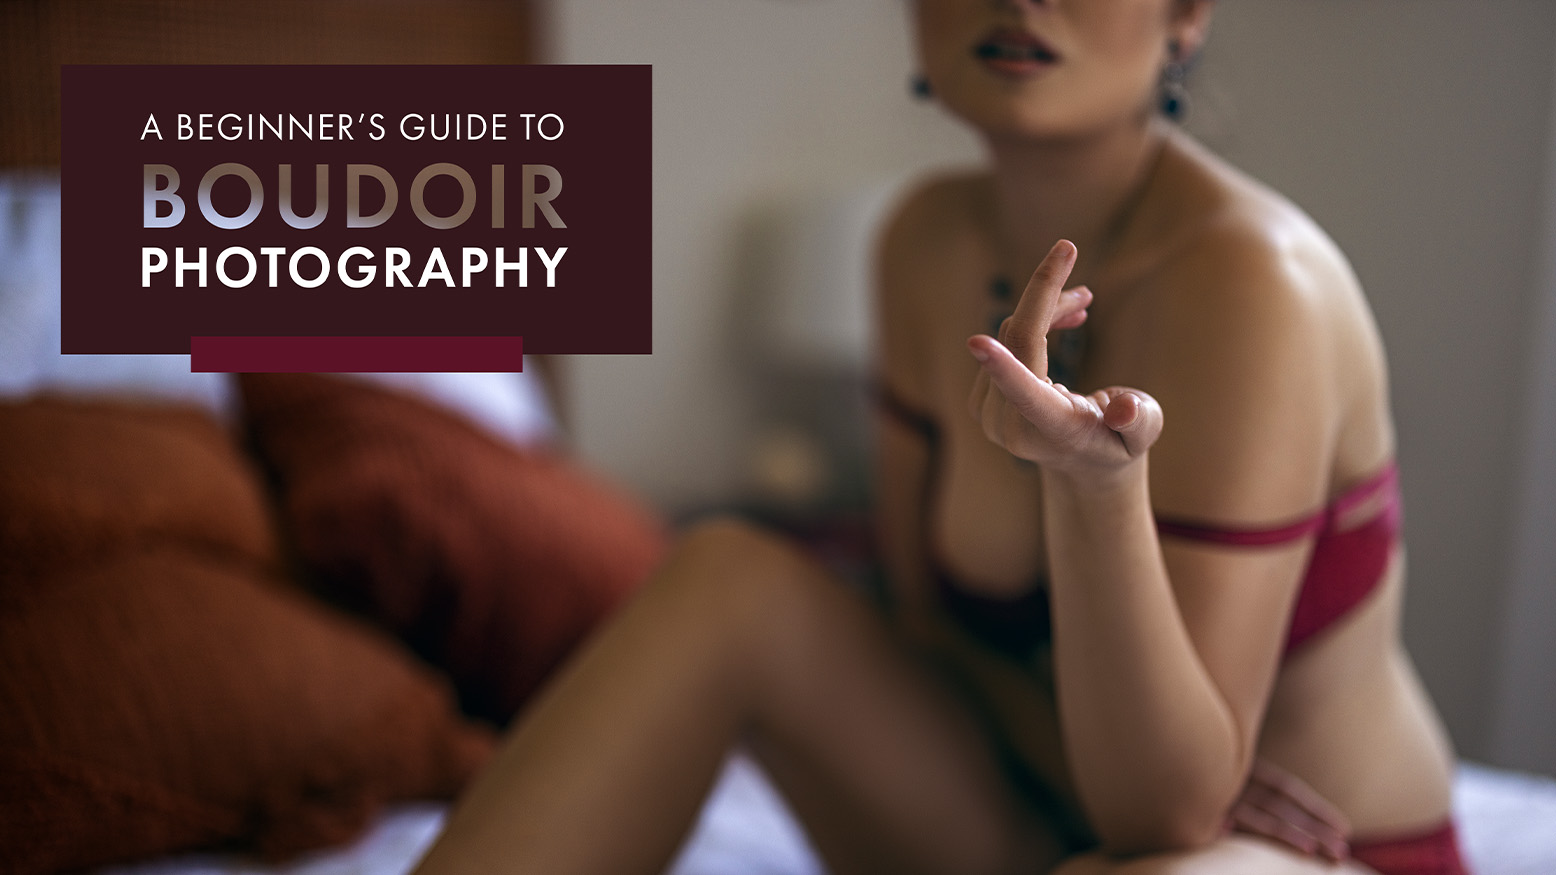 Getting Started in Boudoir Photography